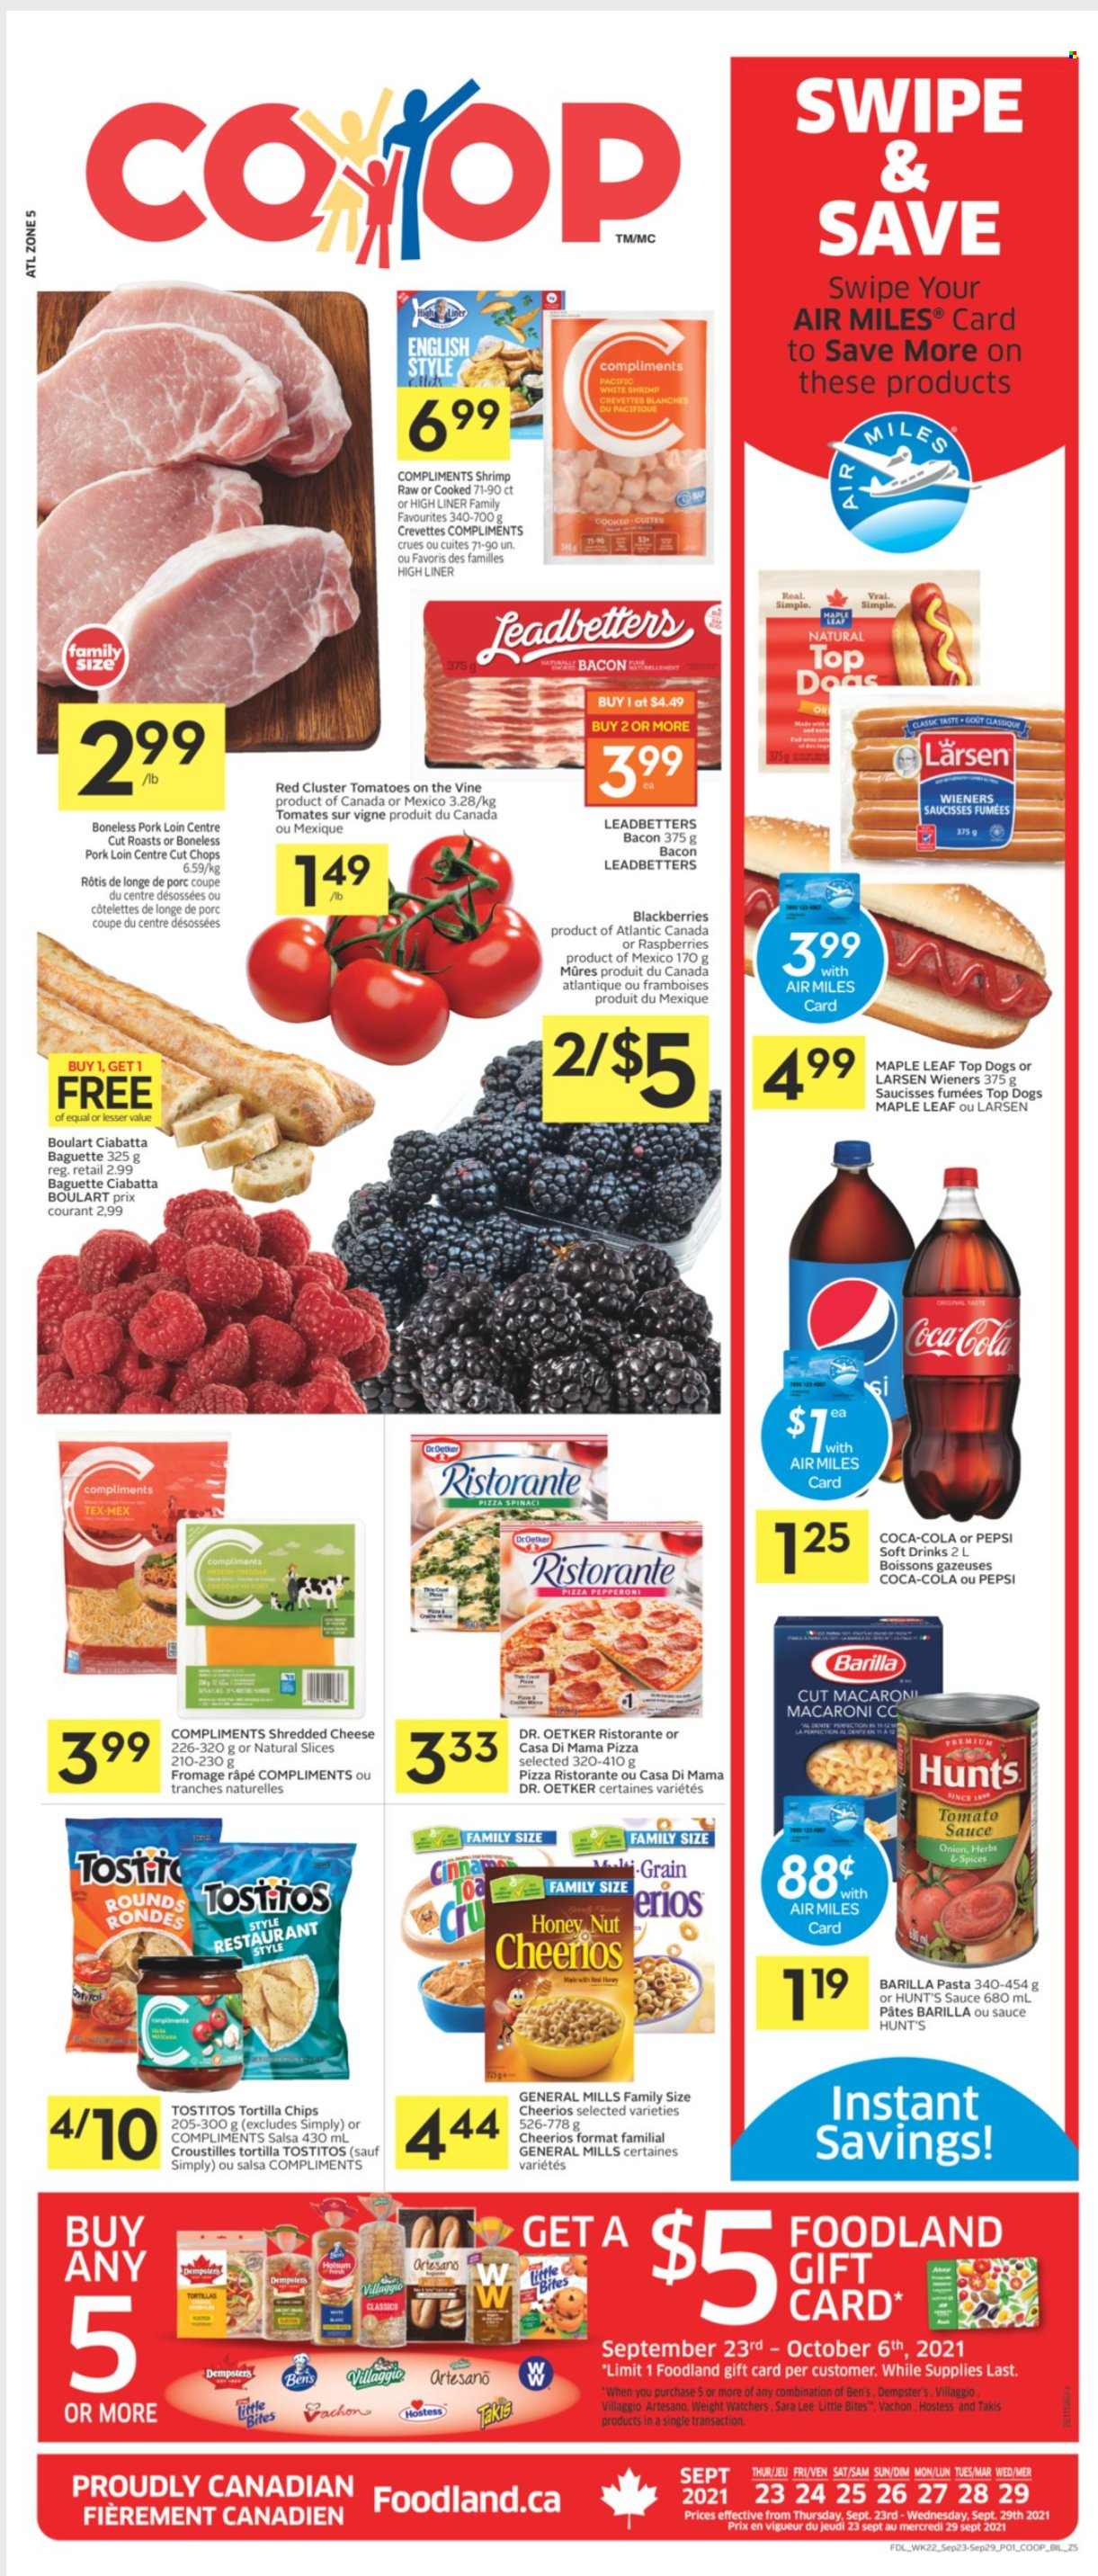 thumbnail - Co-op Flyer - September 23, 2021 - September 29, 2021 - Sales products - Sara Lee, onion, blackberries, shrimps, pizza, macaroni, pasta, sauce, Barilla, bacon, pepperoni, shredded cheese, Dr. Oetker, Little Bites, tortilla chips, Tostitos, tomato sauce, Cheerios, salsa, Classico, Coca-Cola, Pepsi, soft drink, pork loin, pork meat, baguette, ciabatta, chips. Page 1.